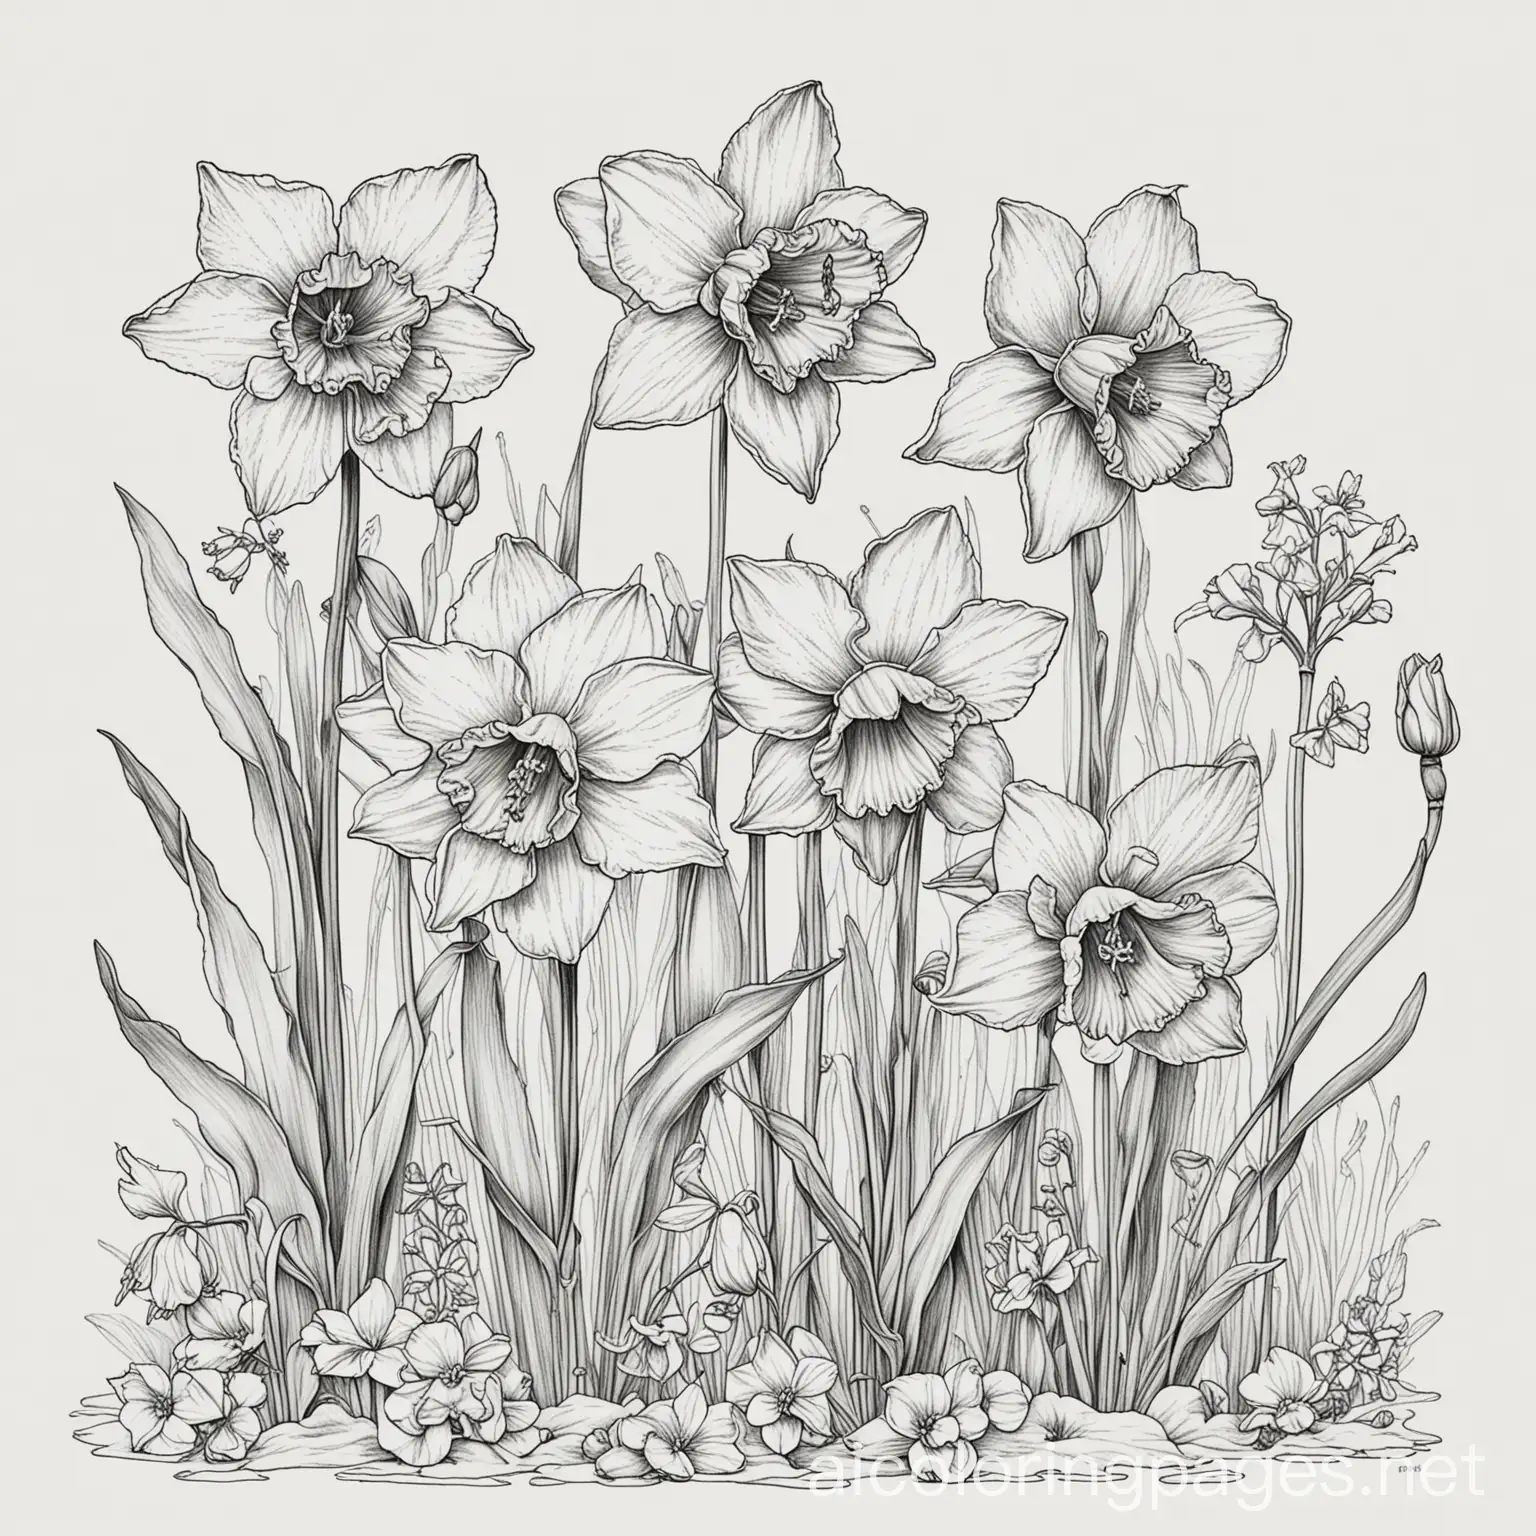 a botanical image of daffodils, clover and sweetpea, Coloring Page, black and white, line art, white background, Simplicity, Ample White Space. The background of the coloring page is plain white to make it easy for young children to color within the lines. The outlines of all the subjects are easy to distinguish, making it simple for kids to color without too much difficulty